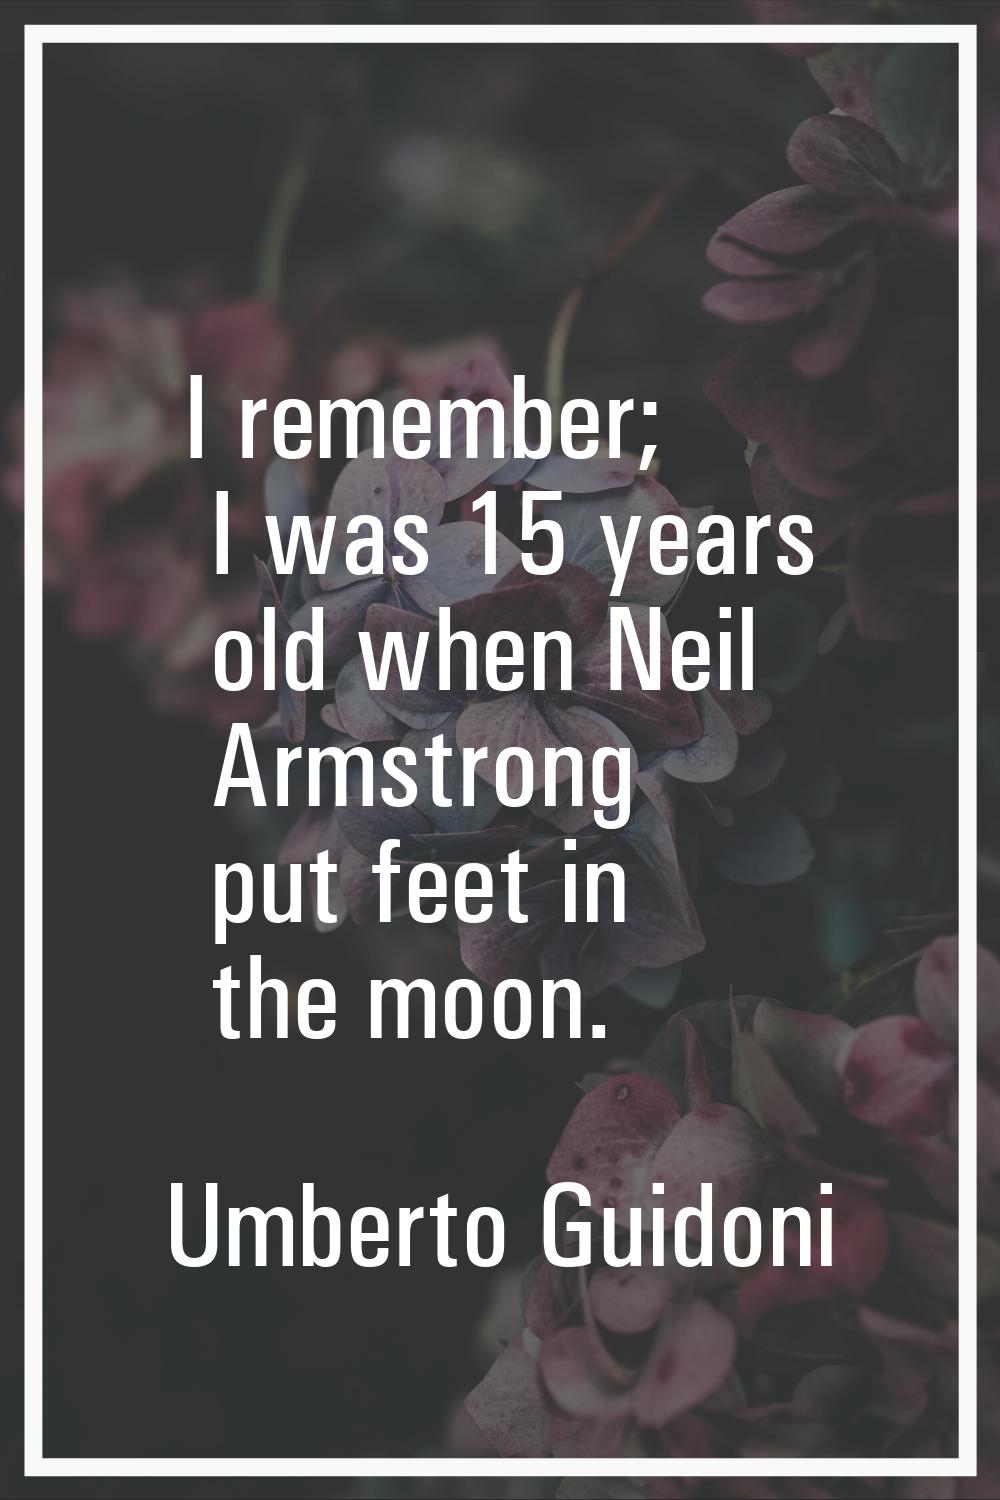 I remember; I was 15 years old when Neil Armstrong put feet in the moon.